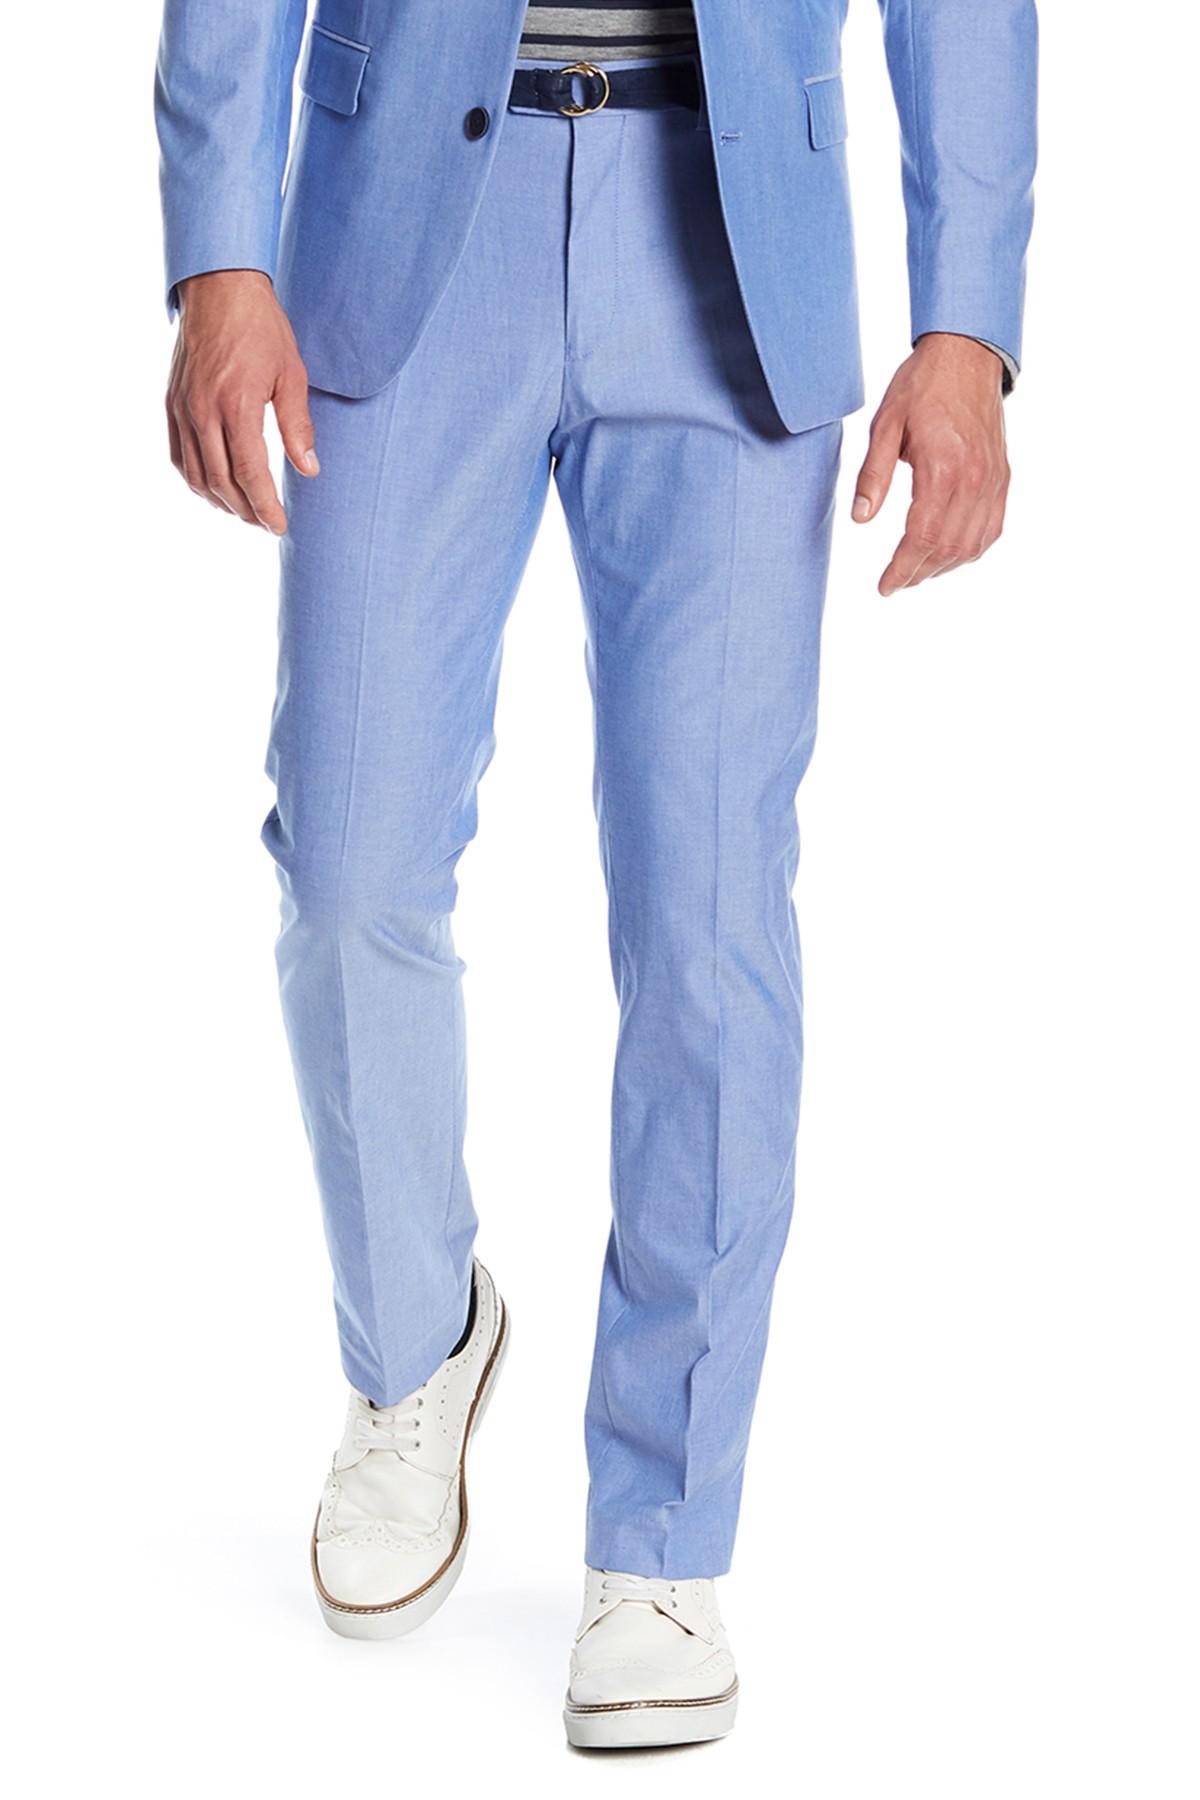 Tommy Hilfiger Chambray Suit Separate Pants in Blue for Men | Lyst